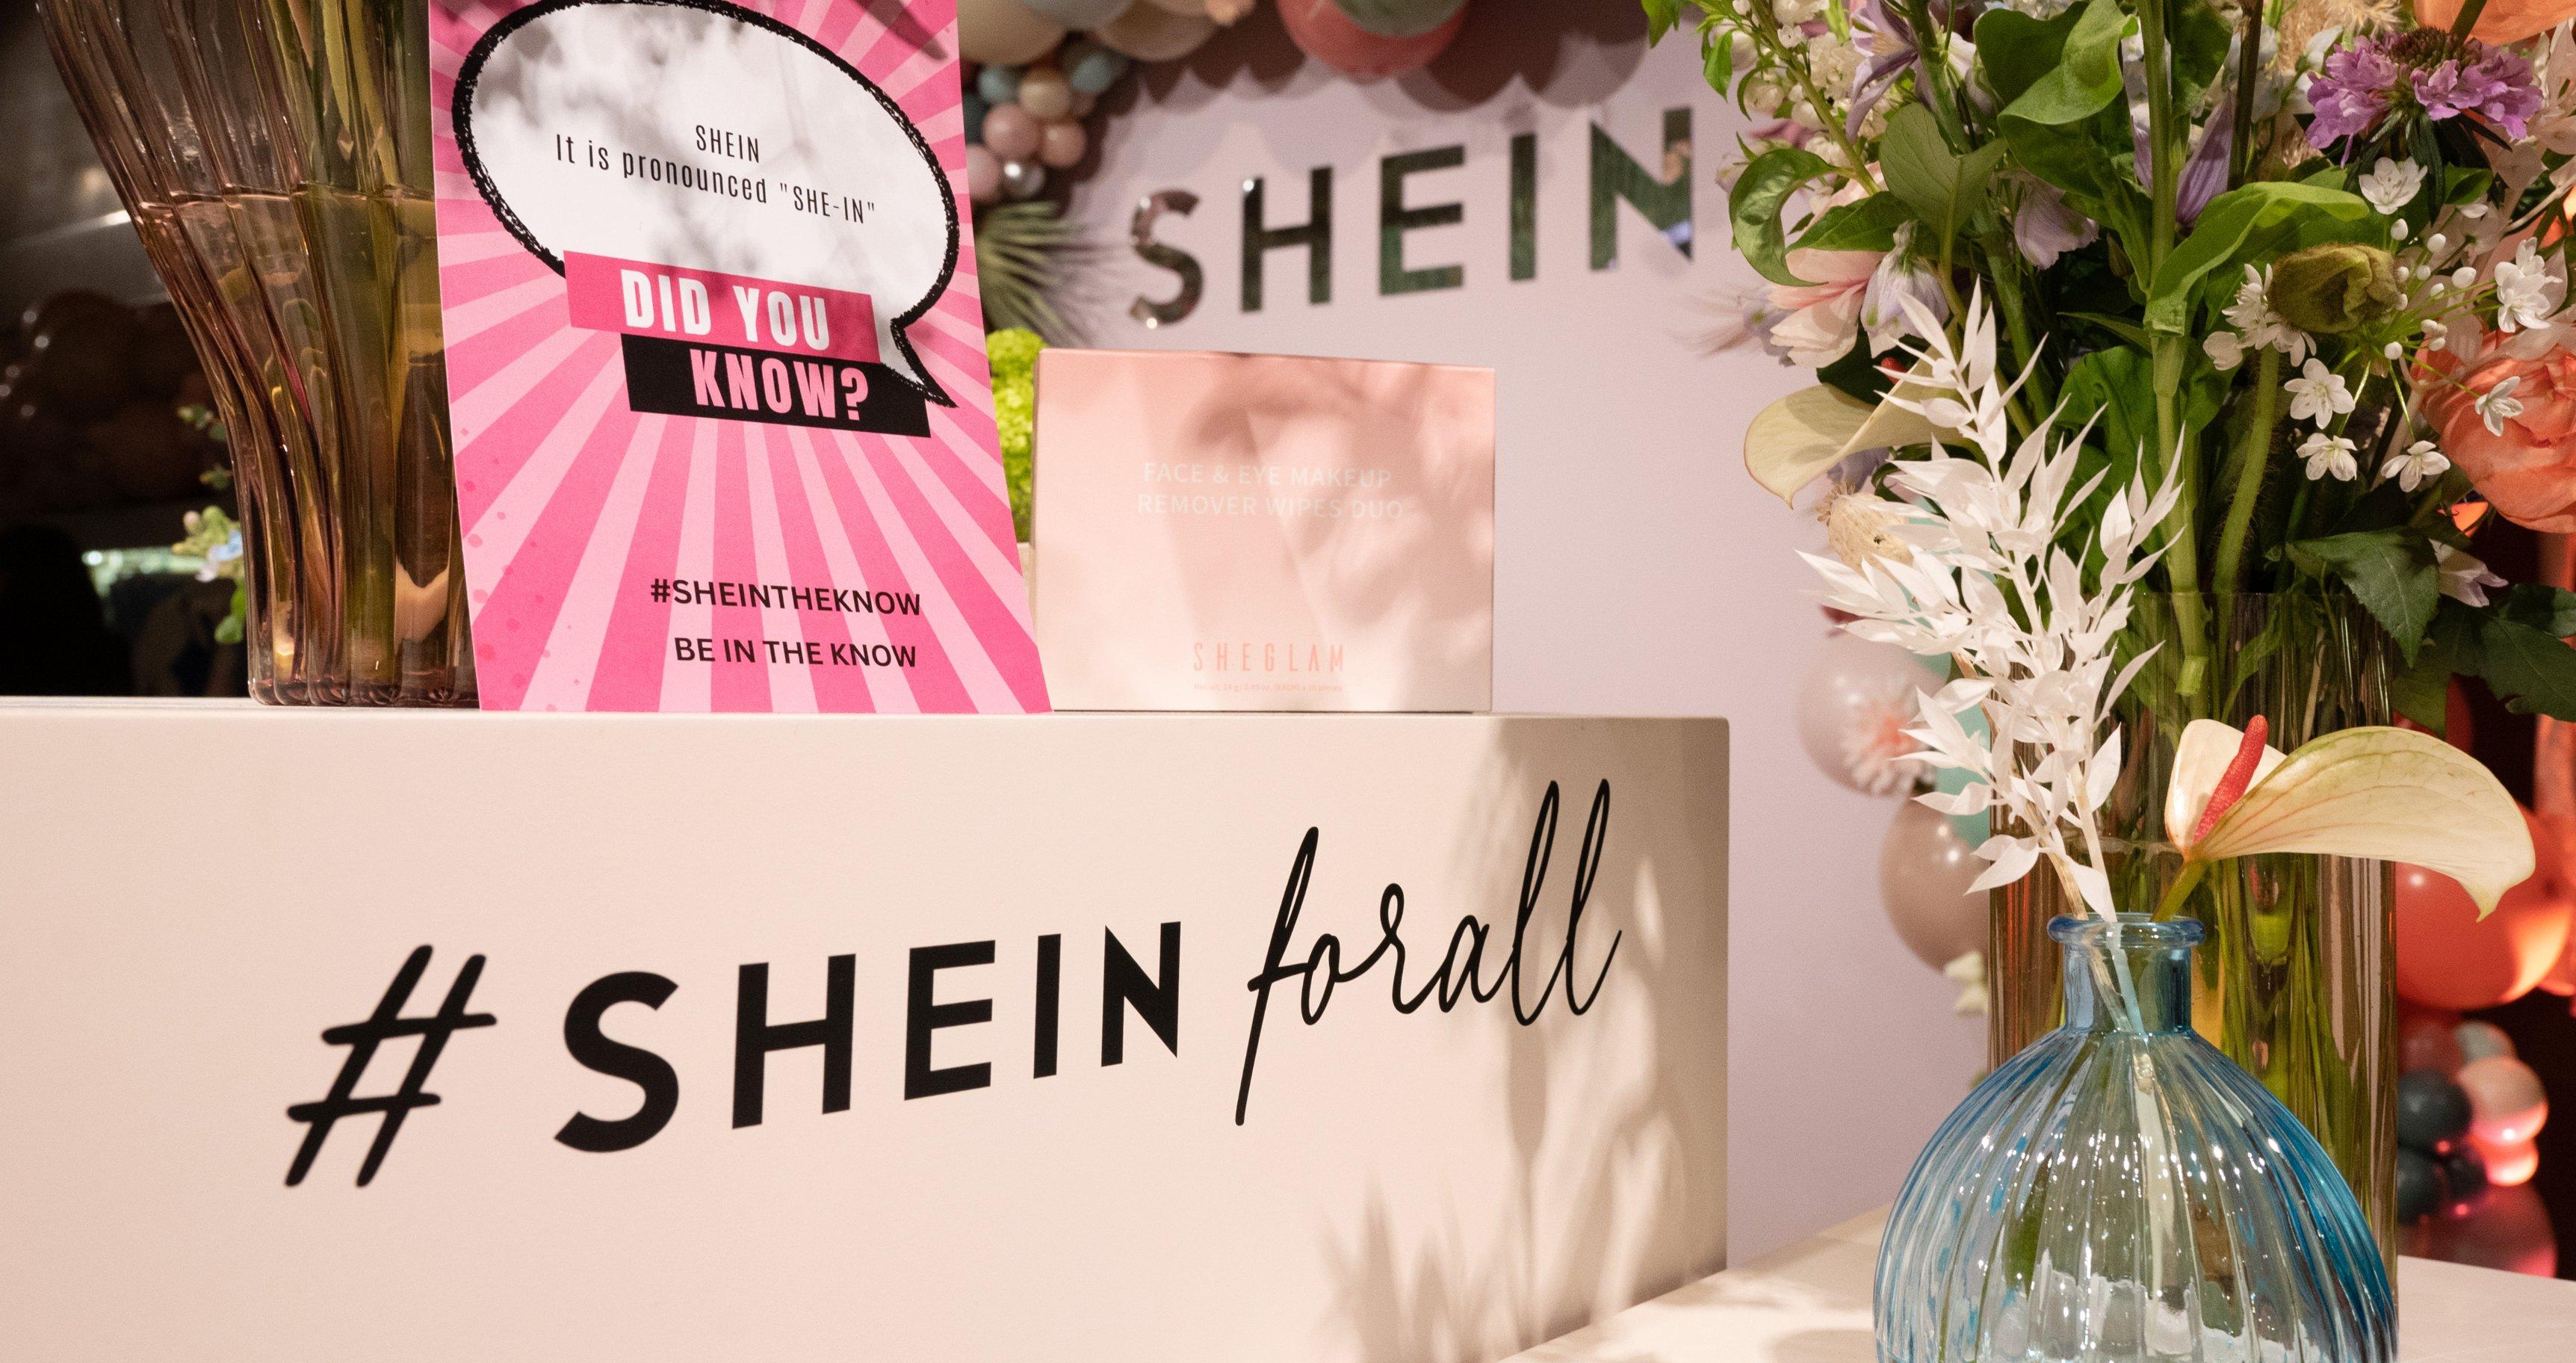 Launch of the SHEIN pop-up shop on March 23, 2023